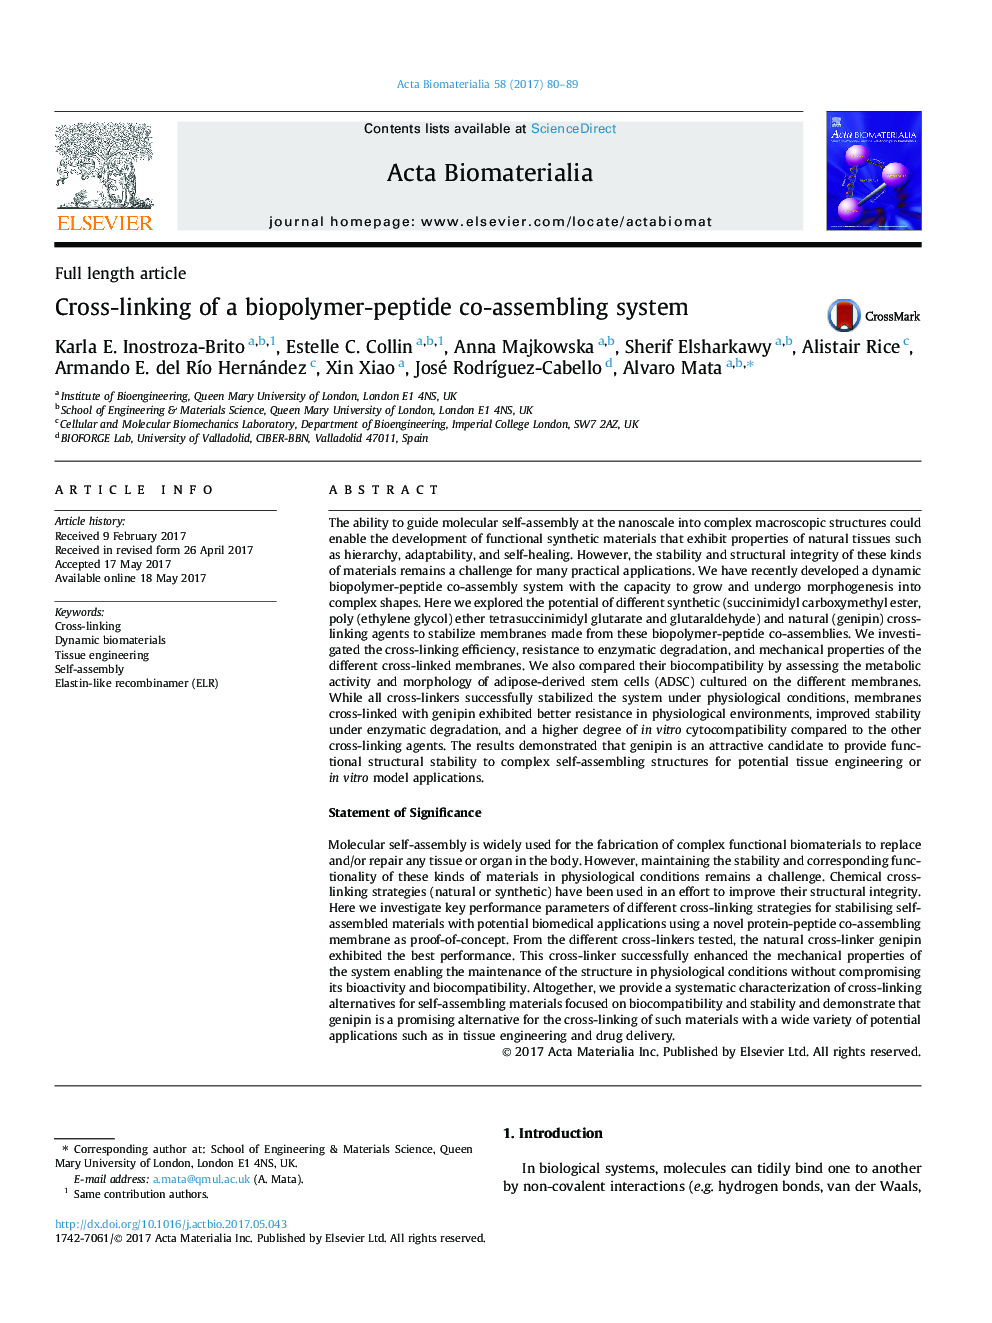 Full length articleCross-linking of a biopolymer-peptide co-assembling system